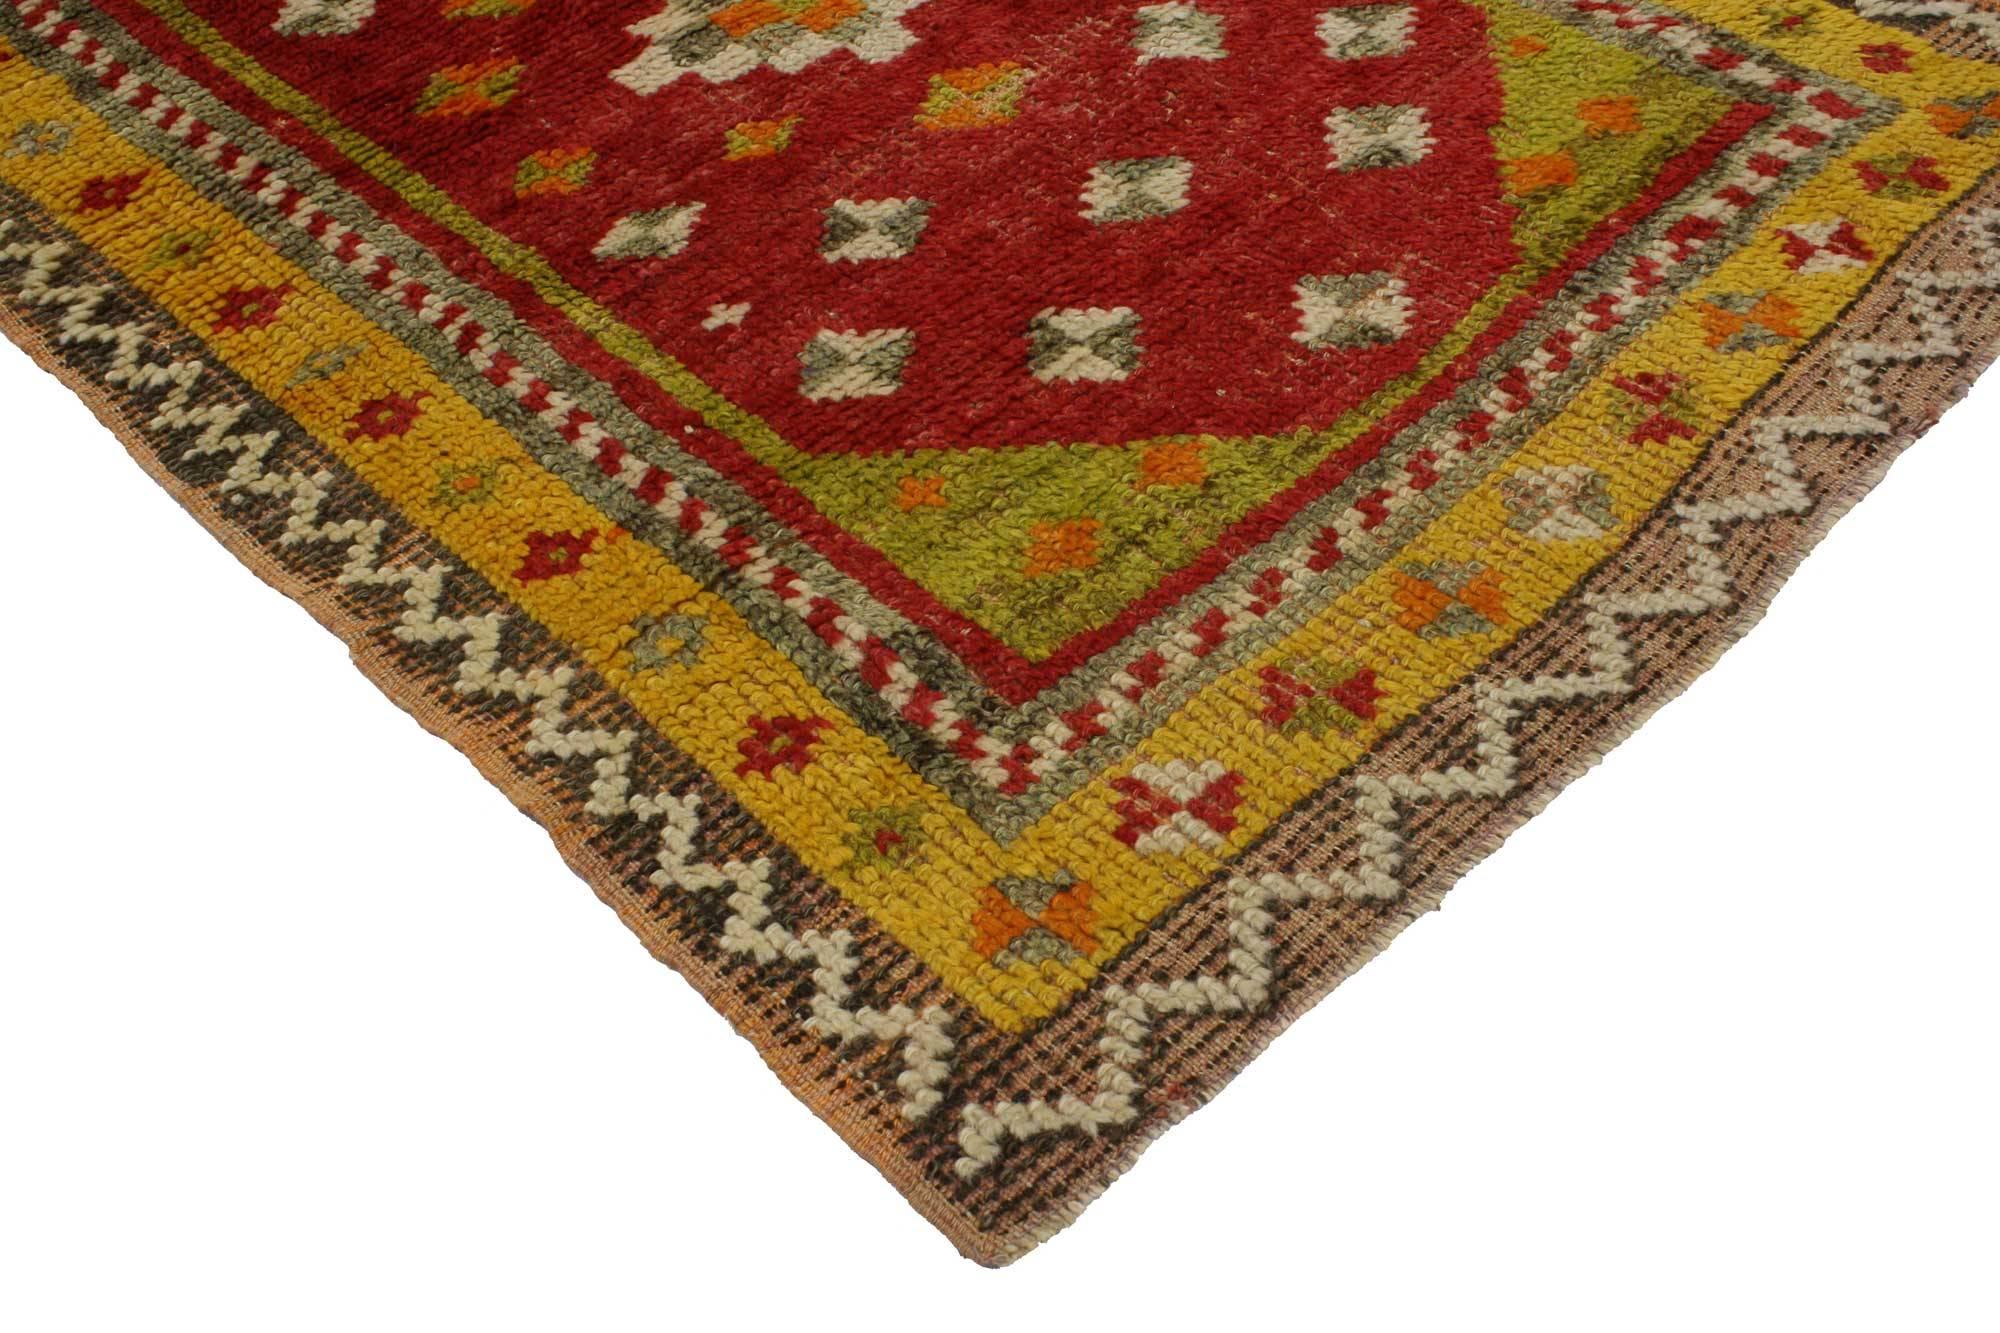 51735, vintage Turkish Oushak accent rug, entry or foyer rug. This hand knotted wool vintage Turkish Oushak rug features a stepped diamond centre medallion floating on an abrashed ruby red field, surrounded by a variety of smaller diamonds. The